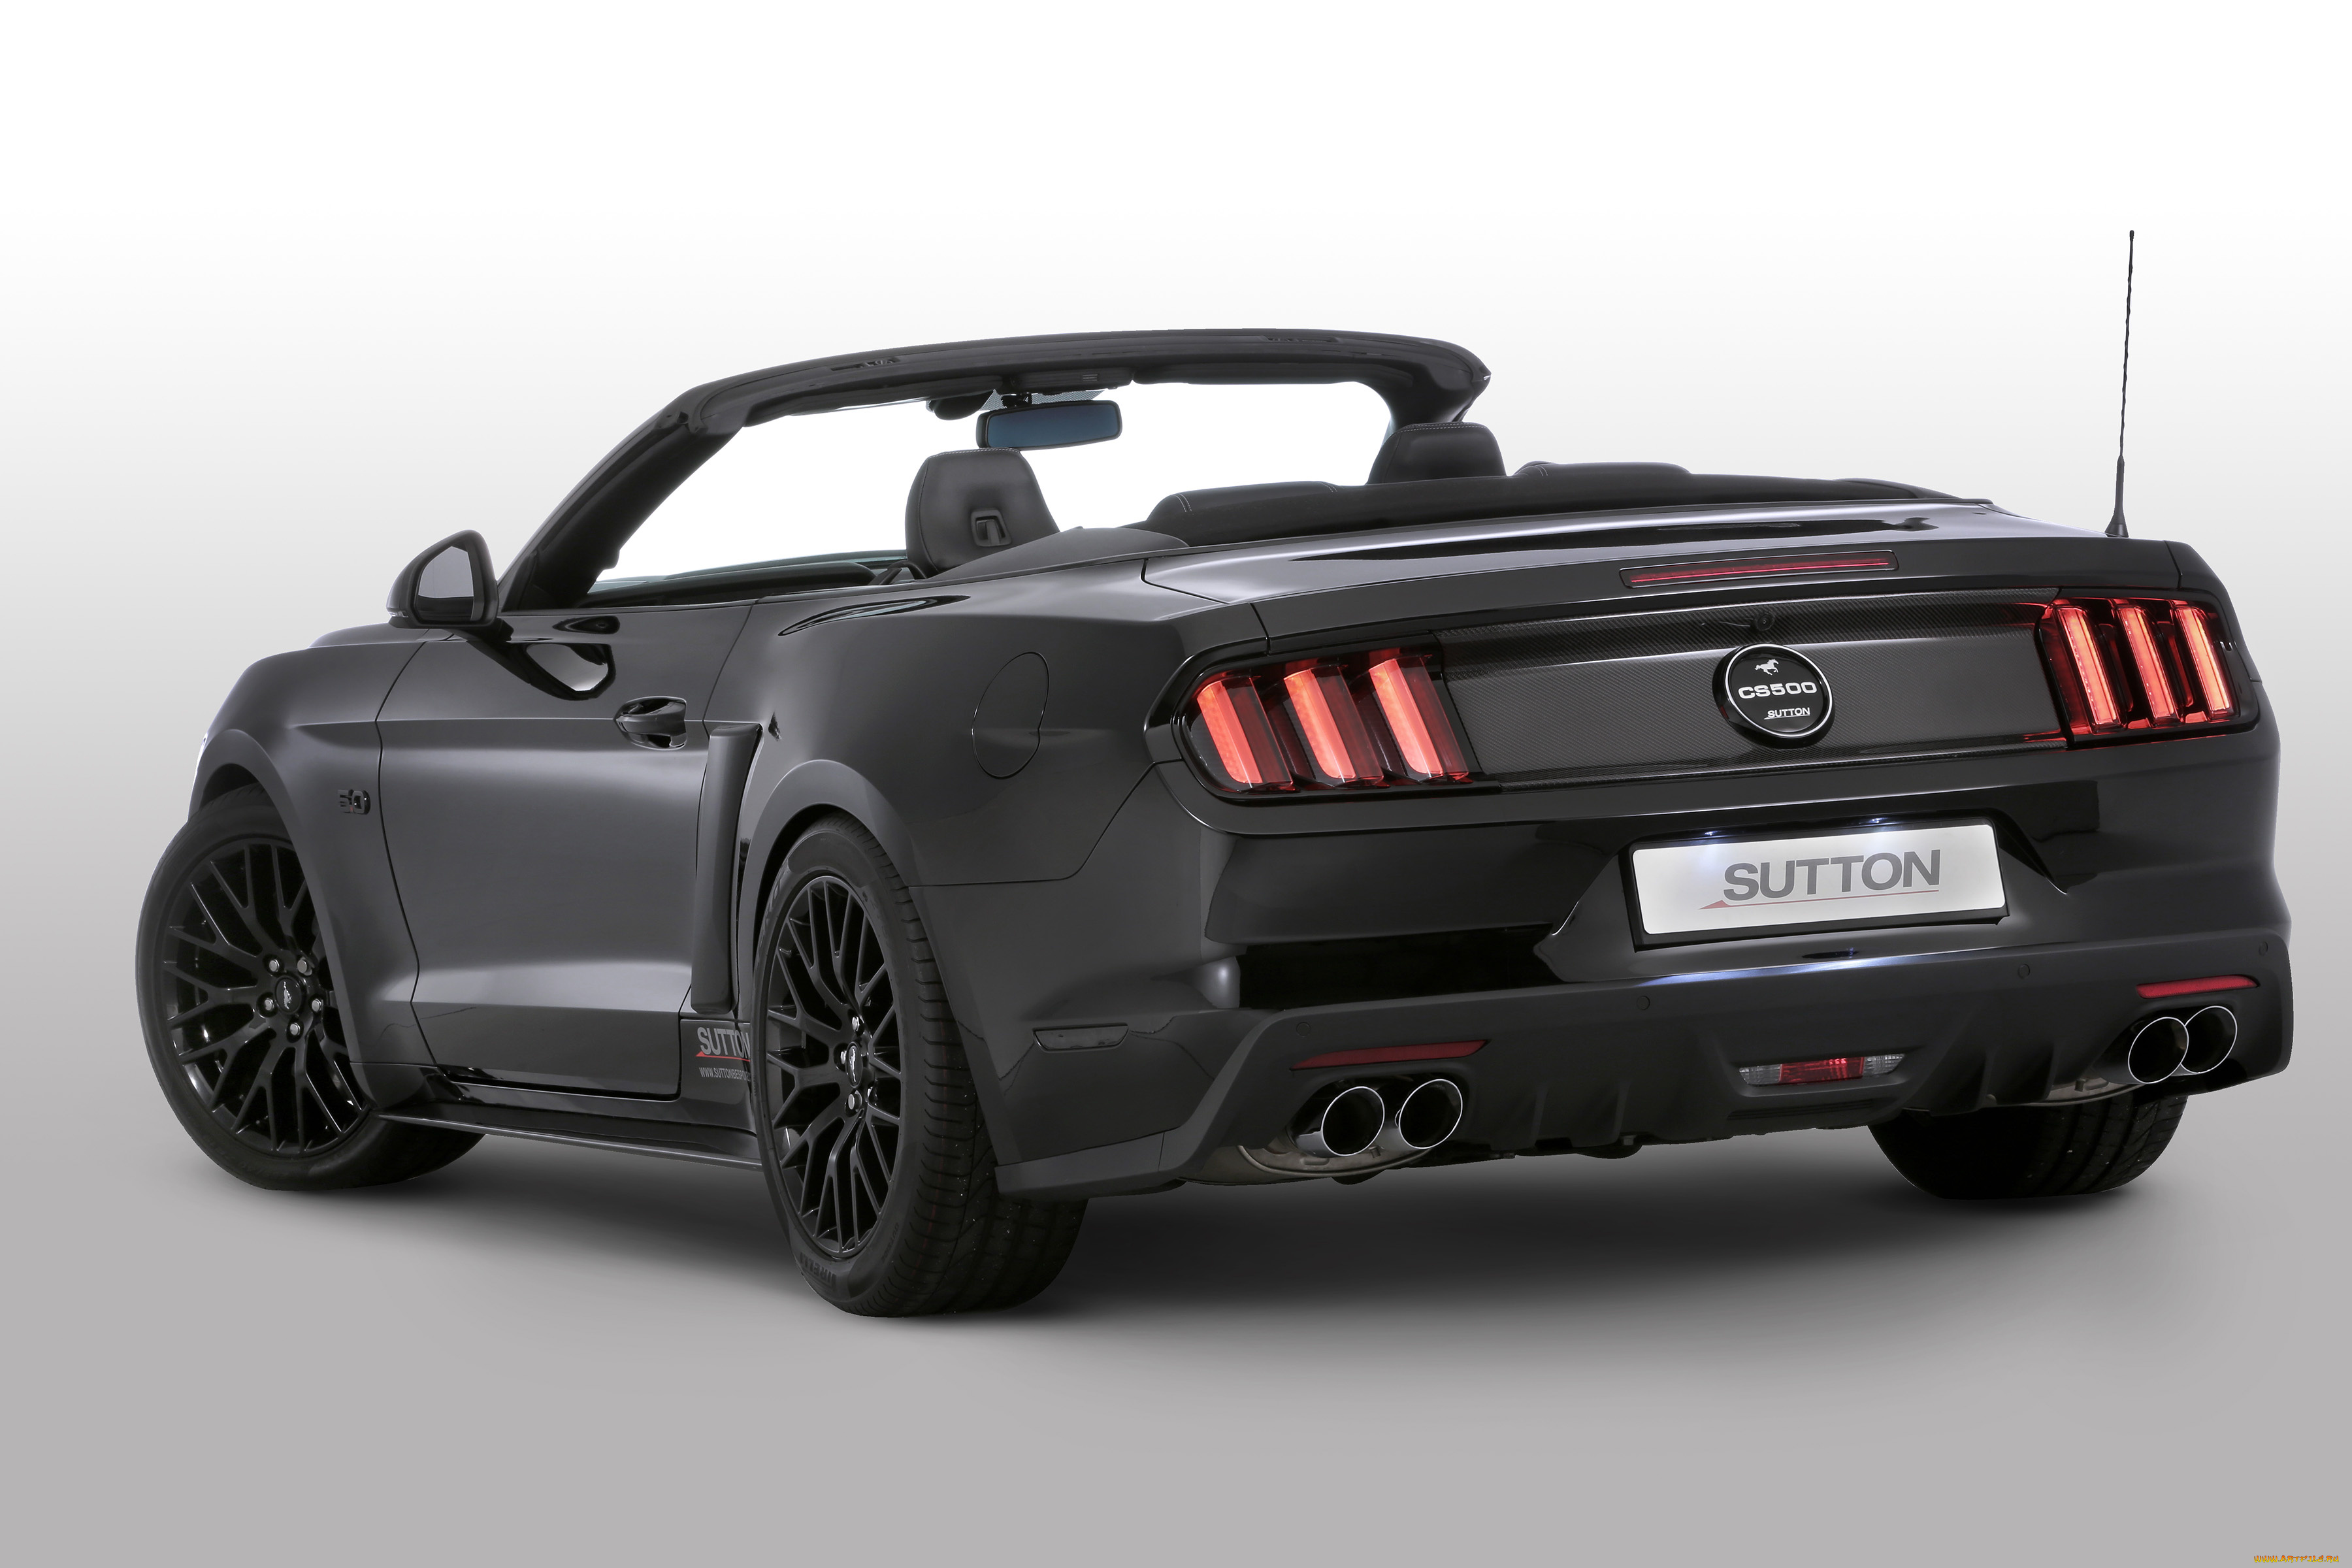 автомобили, ford, convertible, sutton, clive, cs500, mustang, 2016г